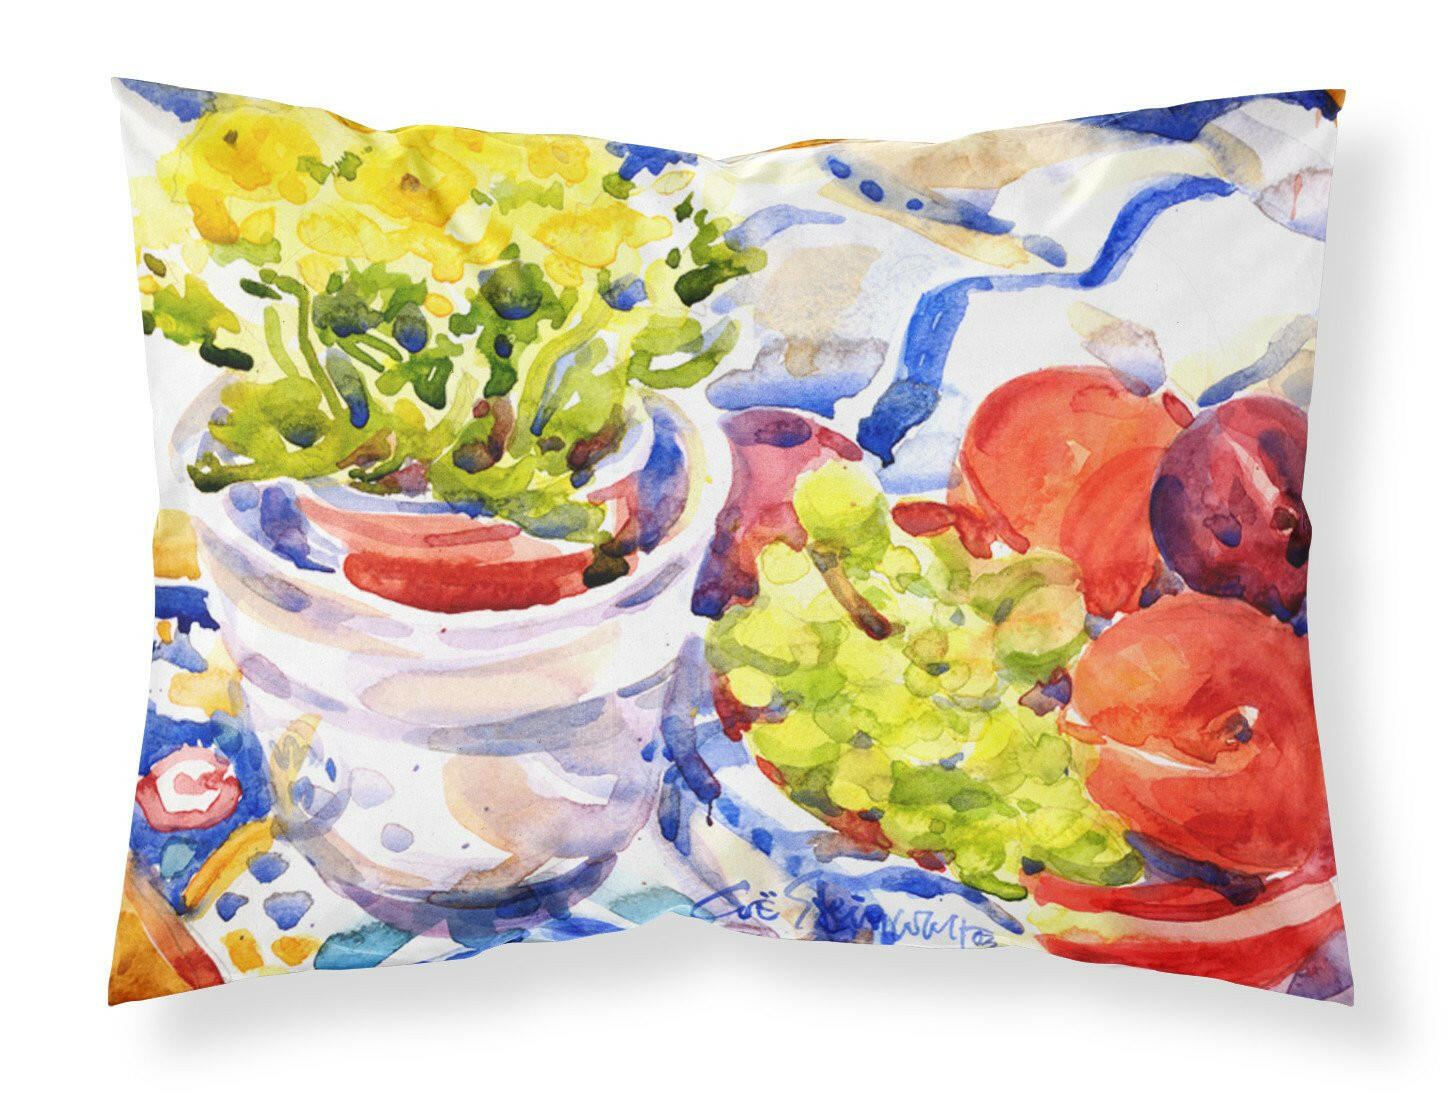 Apples Plums Grapes with Flowers Moisture wicking Fabric standard pillowcase by Caroline's Treasures